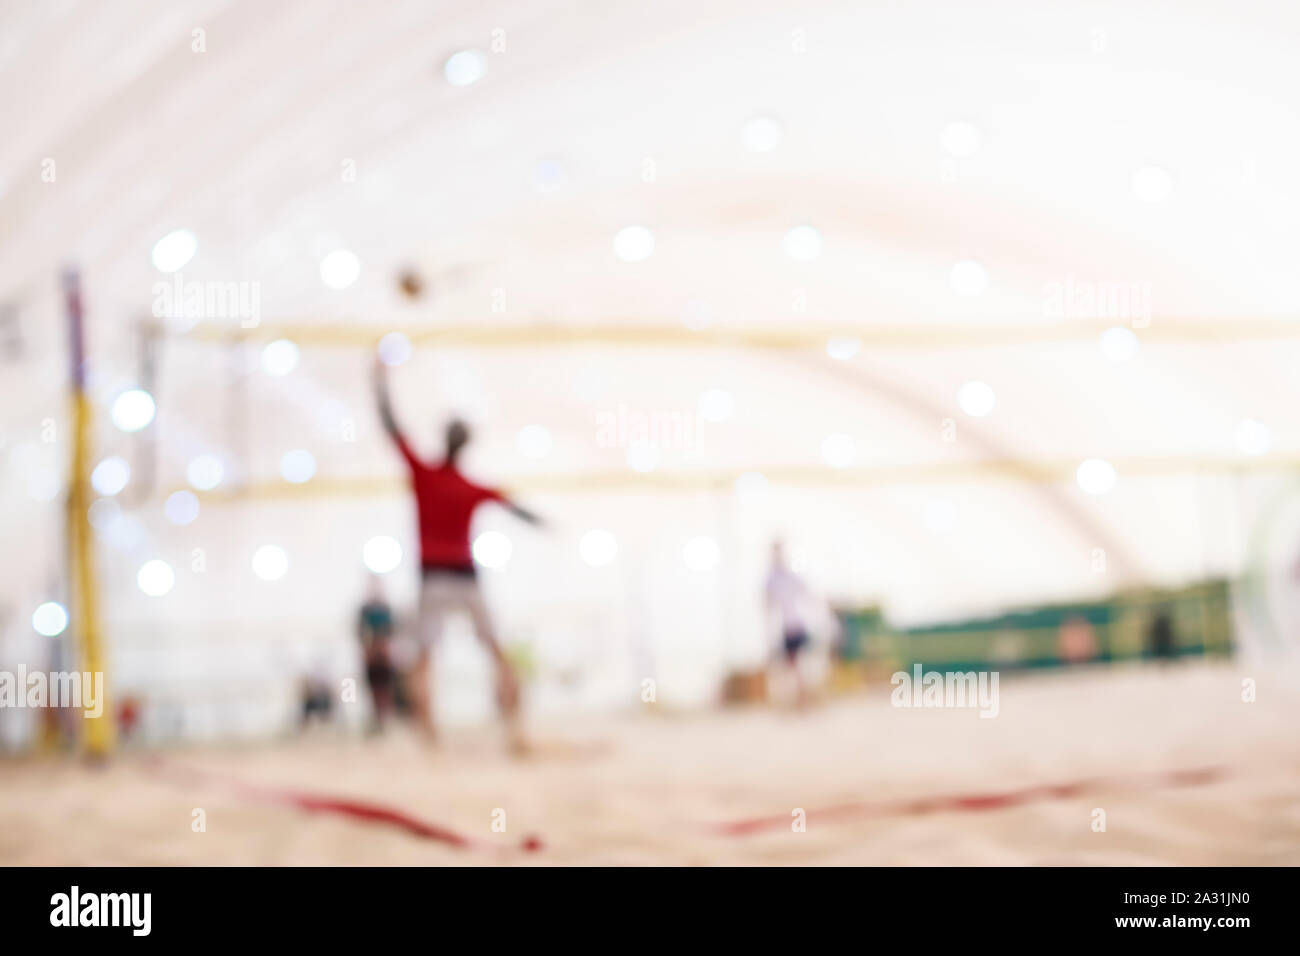 Blurred silhouettes of people playing beach volleyball in the inflatable hangar winter. Stock Photo